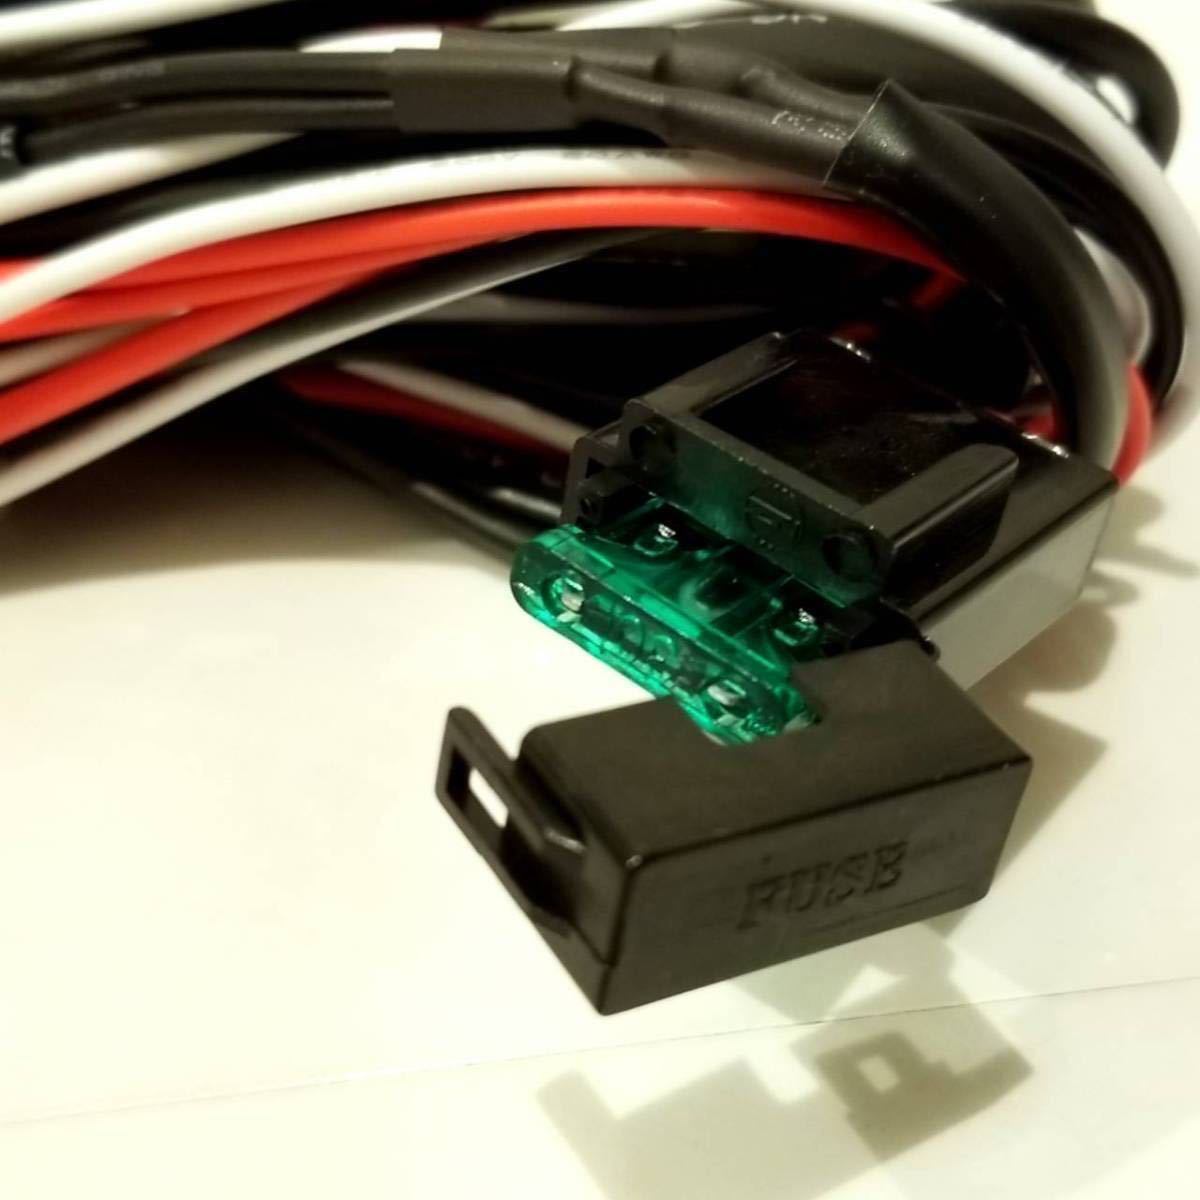  battery failure prevention circuit relay Harness kit 40A switch 2 light for fuse light bar foglamp wiring all-purpose Lead line connector power cord 